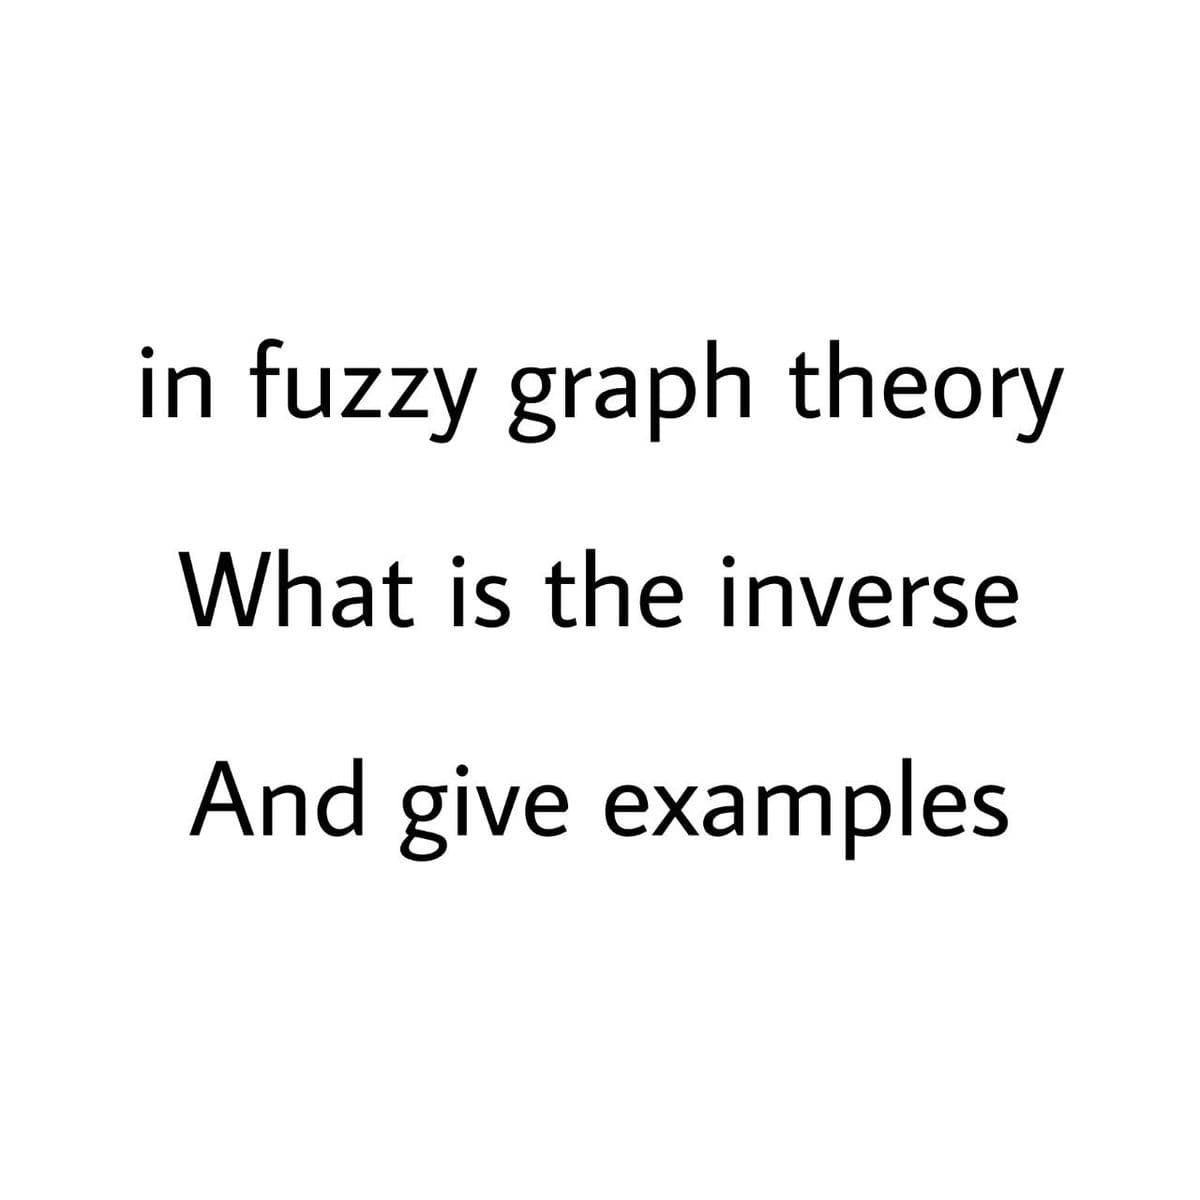 in fuzzy graph theory
What is the inverse
And give examples
